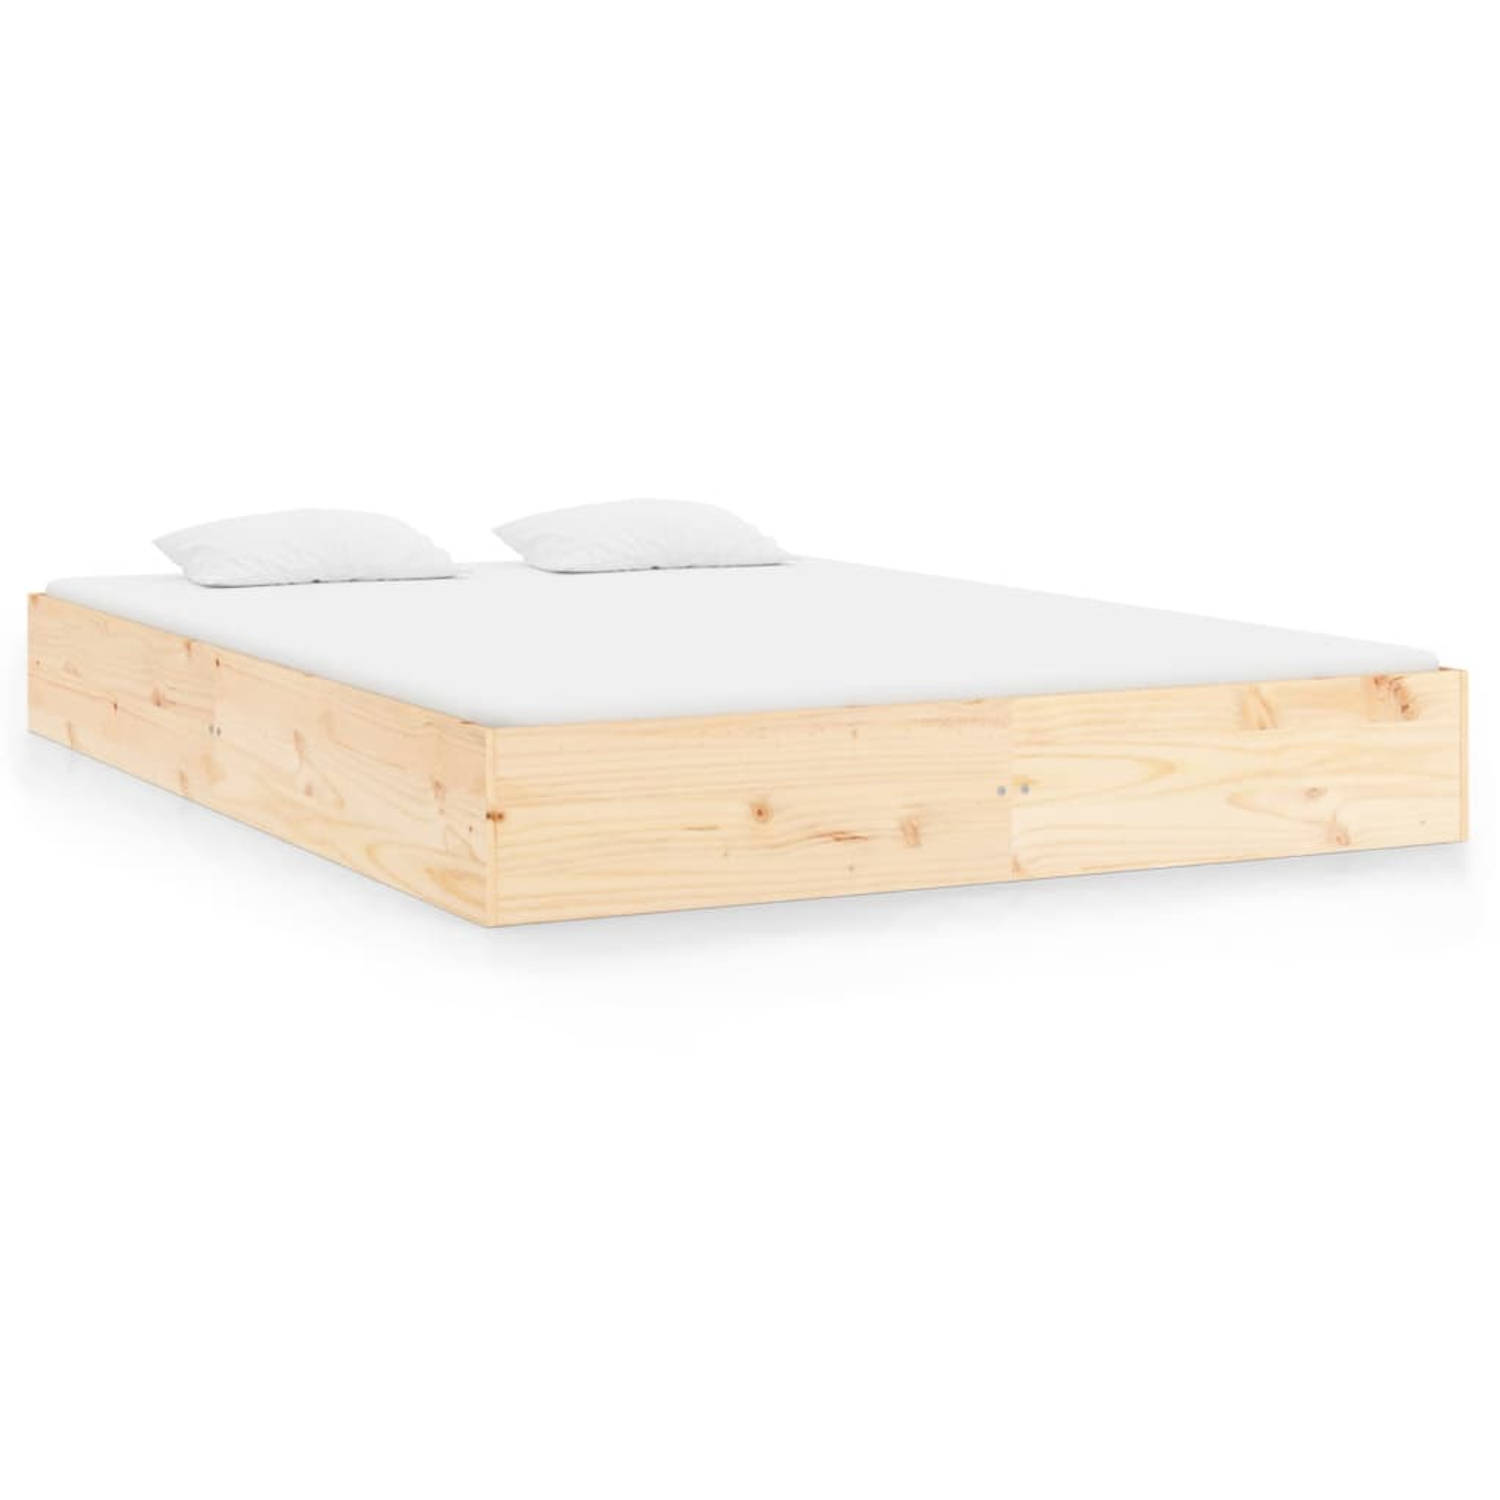 The Living Store Bedframe massief hout 120x200 cm - Bed